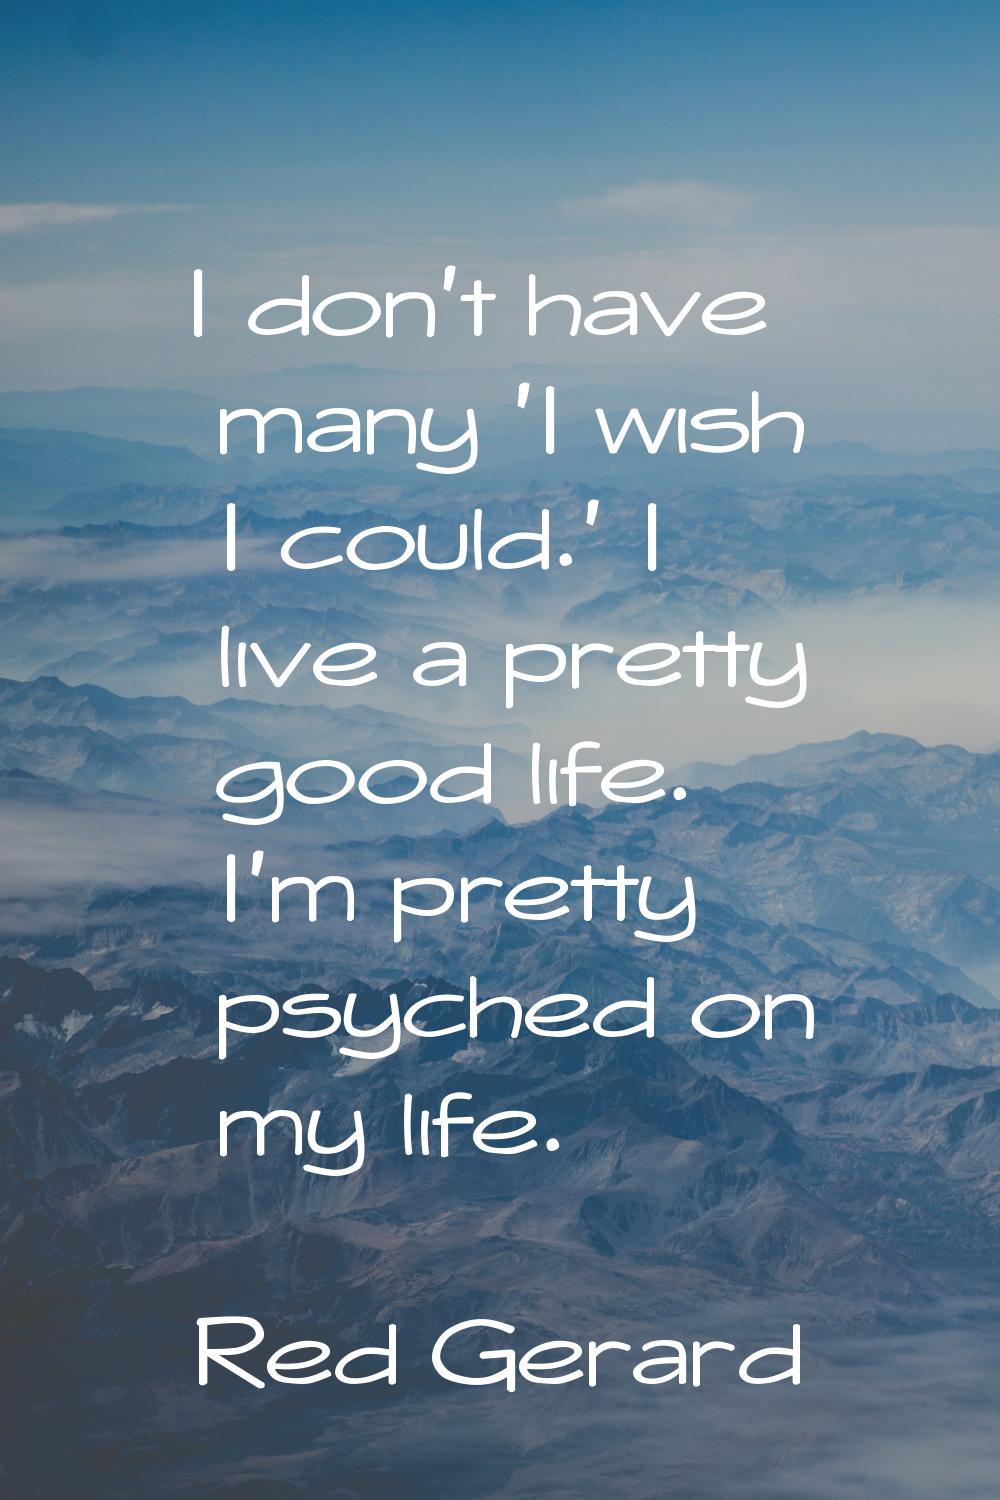 I don't have many 'I wish I could.' I live a pretty good life. I'm pretty psyched on my life.